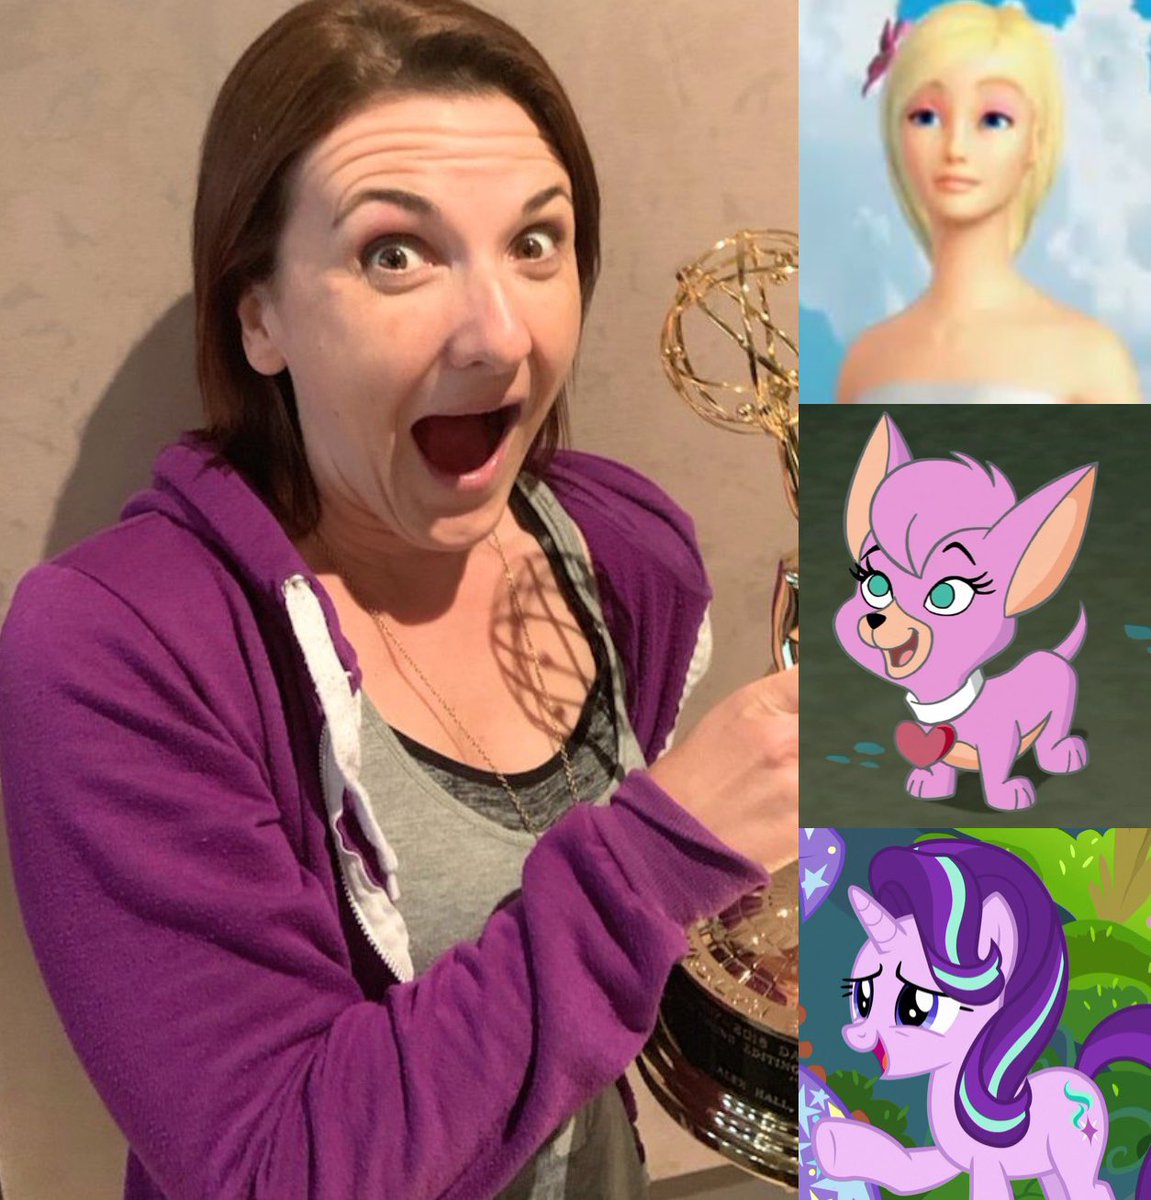 Happy 47th birthday to Kelly Sheridan! The voice of Barbie (and her characters) in the Barbie movies (2001-2010, 2012-2015), Mammoth Mutt on Krypto the Superdog and Starlight Glimmer on My Little Pony: Friendship is Magic. #KellySheridan